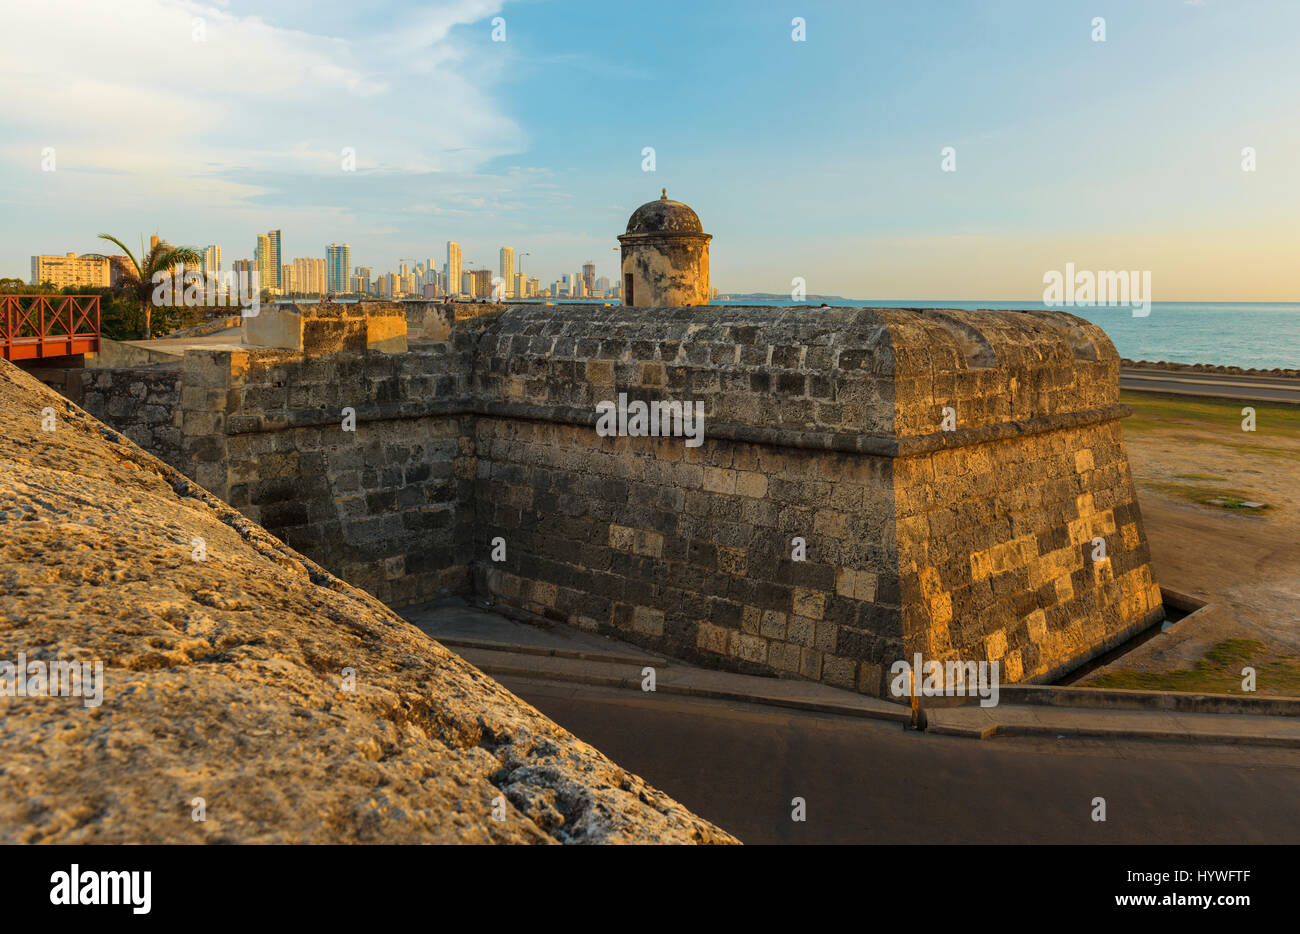 The San Felipe fortress and the modern city of Cartagena in the background by the Caribbean Sea at sunset, Colombia. Stock Photo